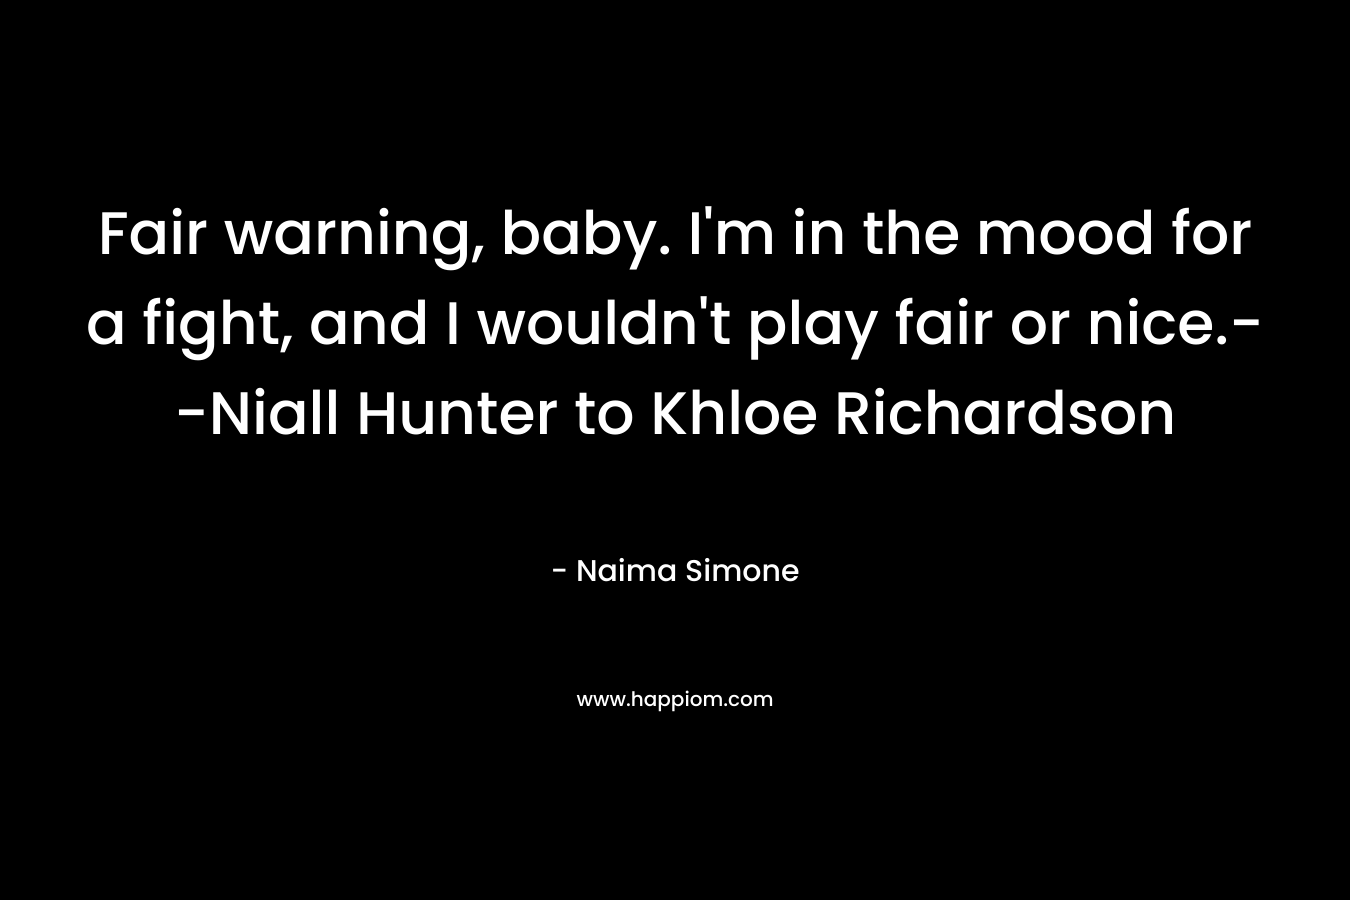 Fair warning, baby. I'm in the mood for a fight, and I wouldn't play fair or nice.--Niall Hunter to Khloe Richardson